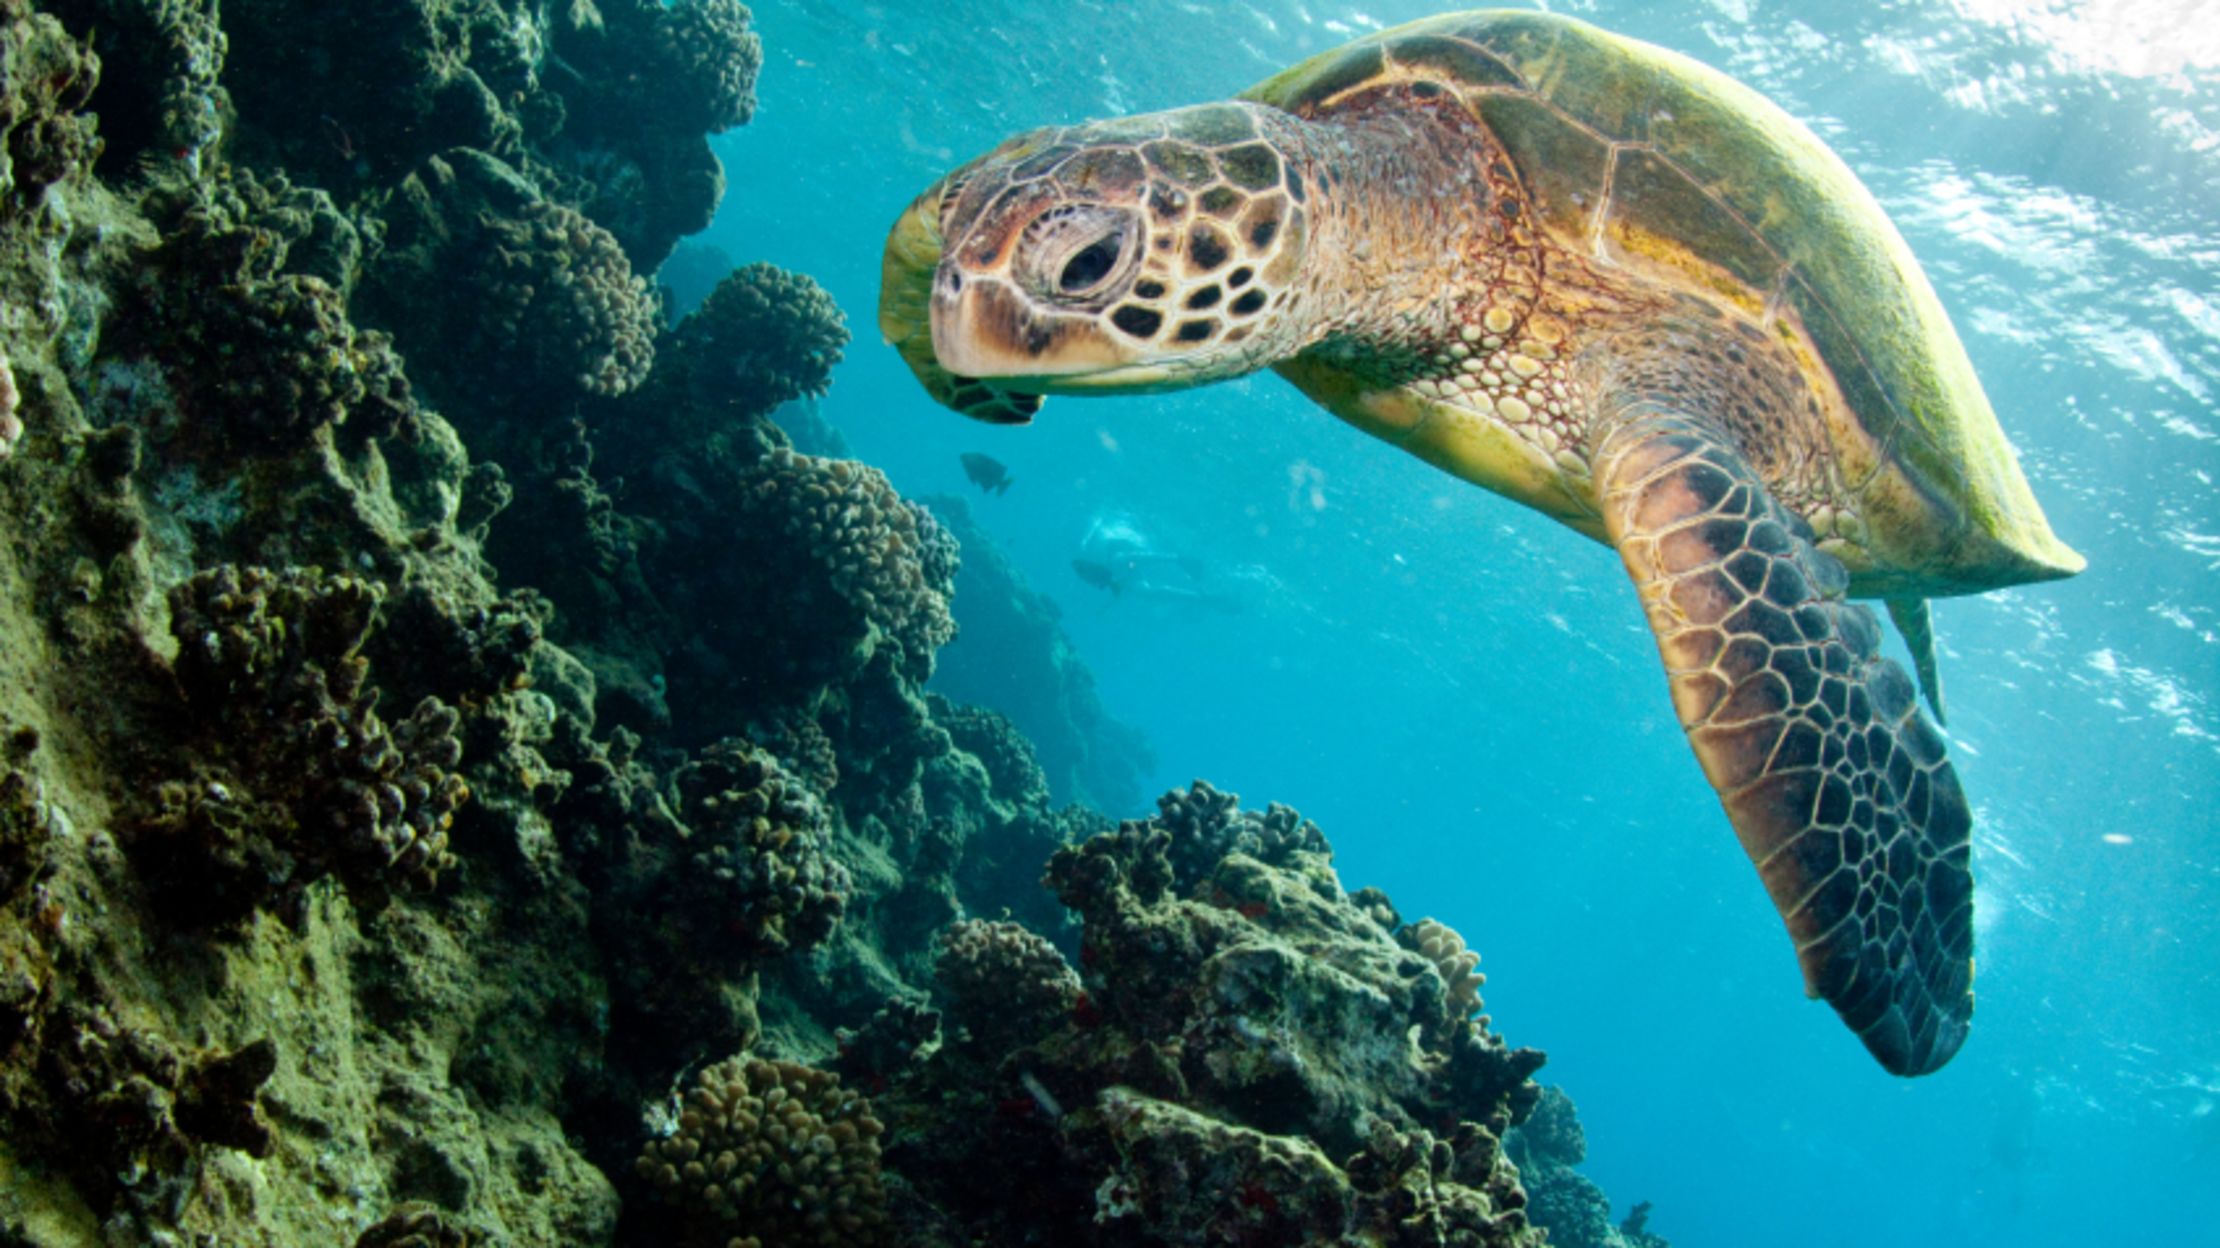 20 Things You Didn’t Know About Sea Turtles